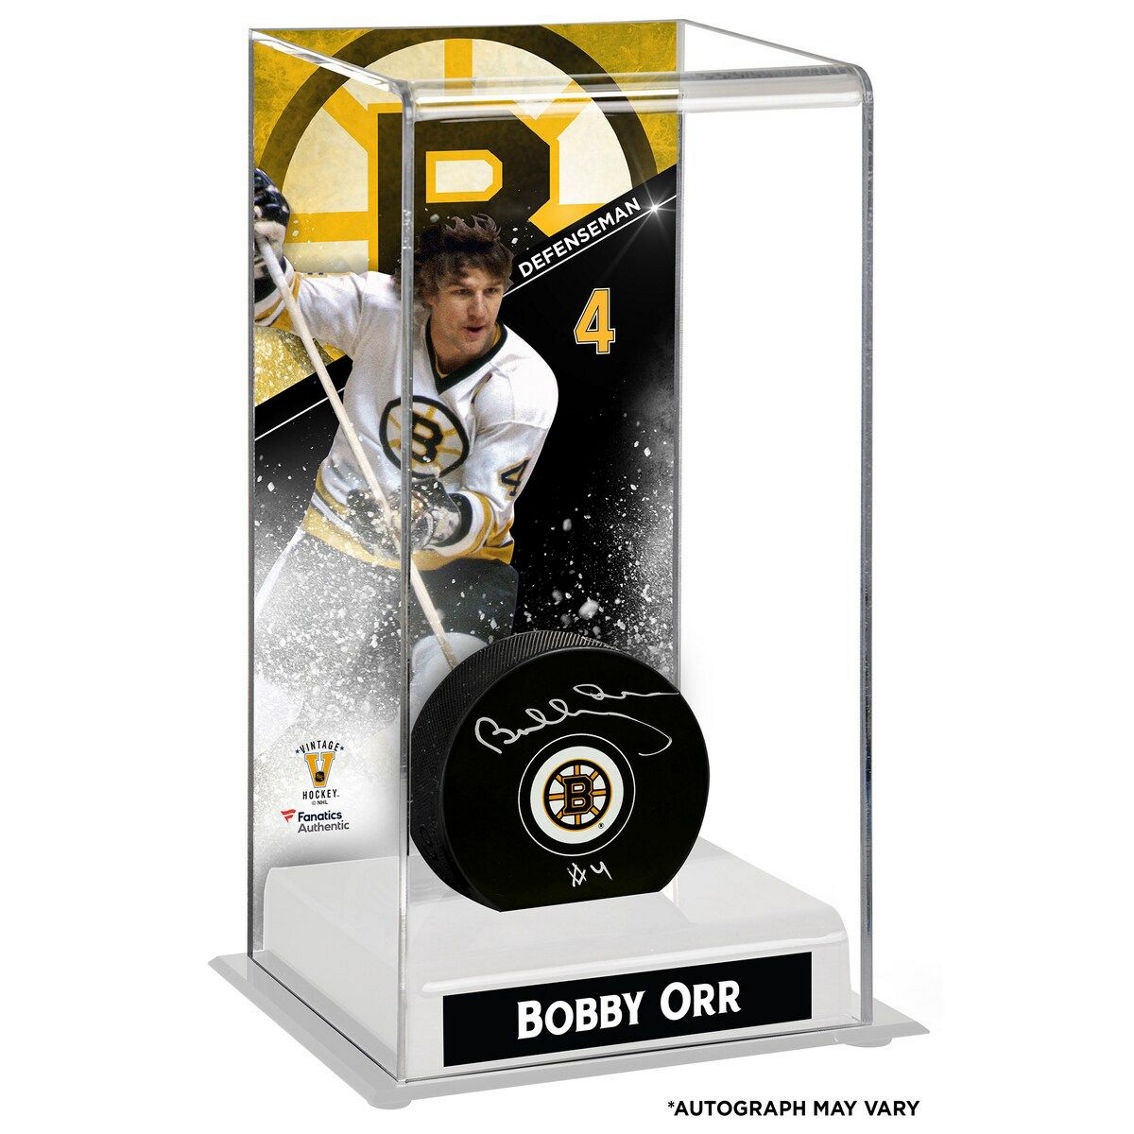 Fanatics Authentic Bobby Orr Boston Bruins Autographed Puck with Deluxe Tall Hockey Puck Case - Image 2 of 2